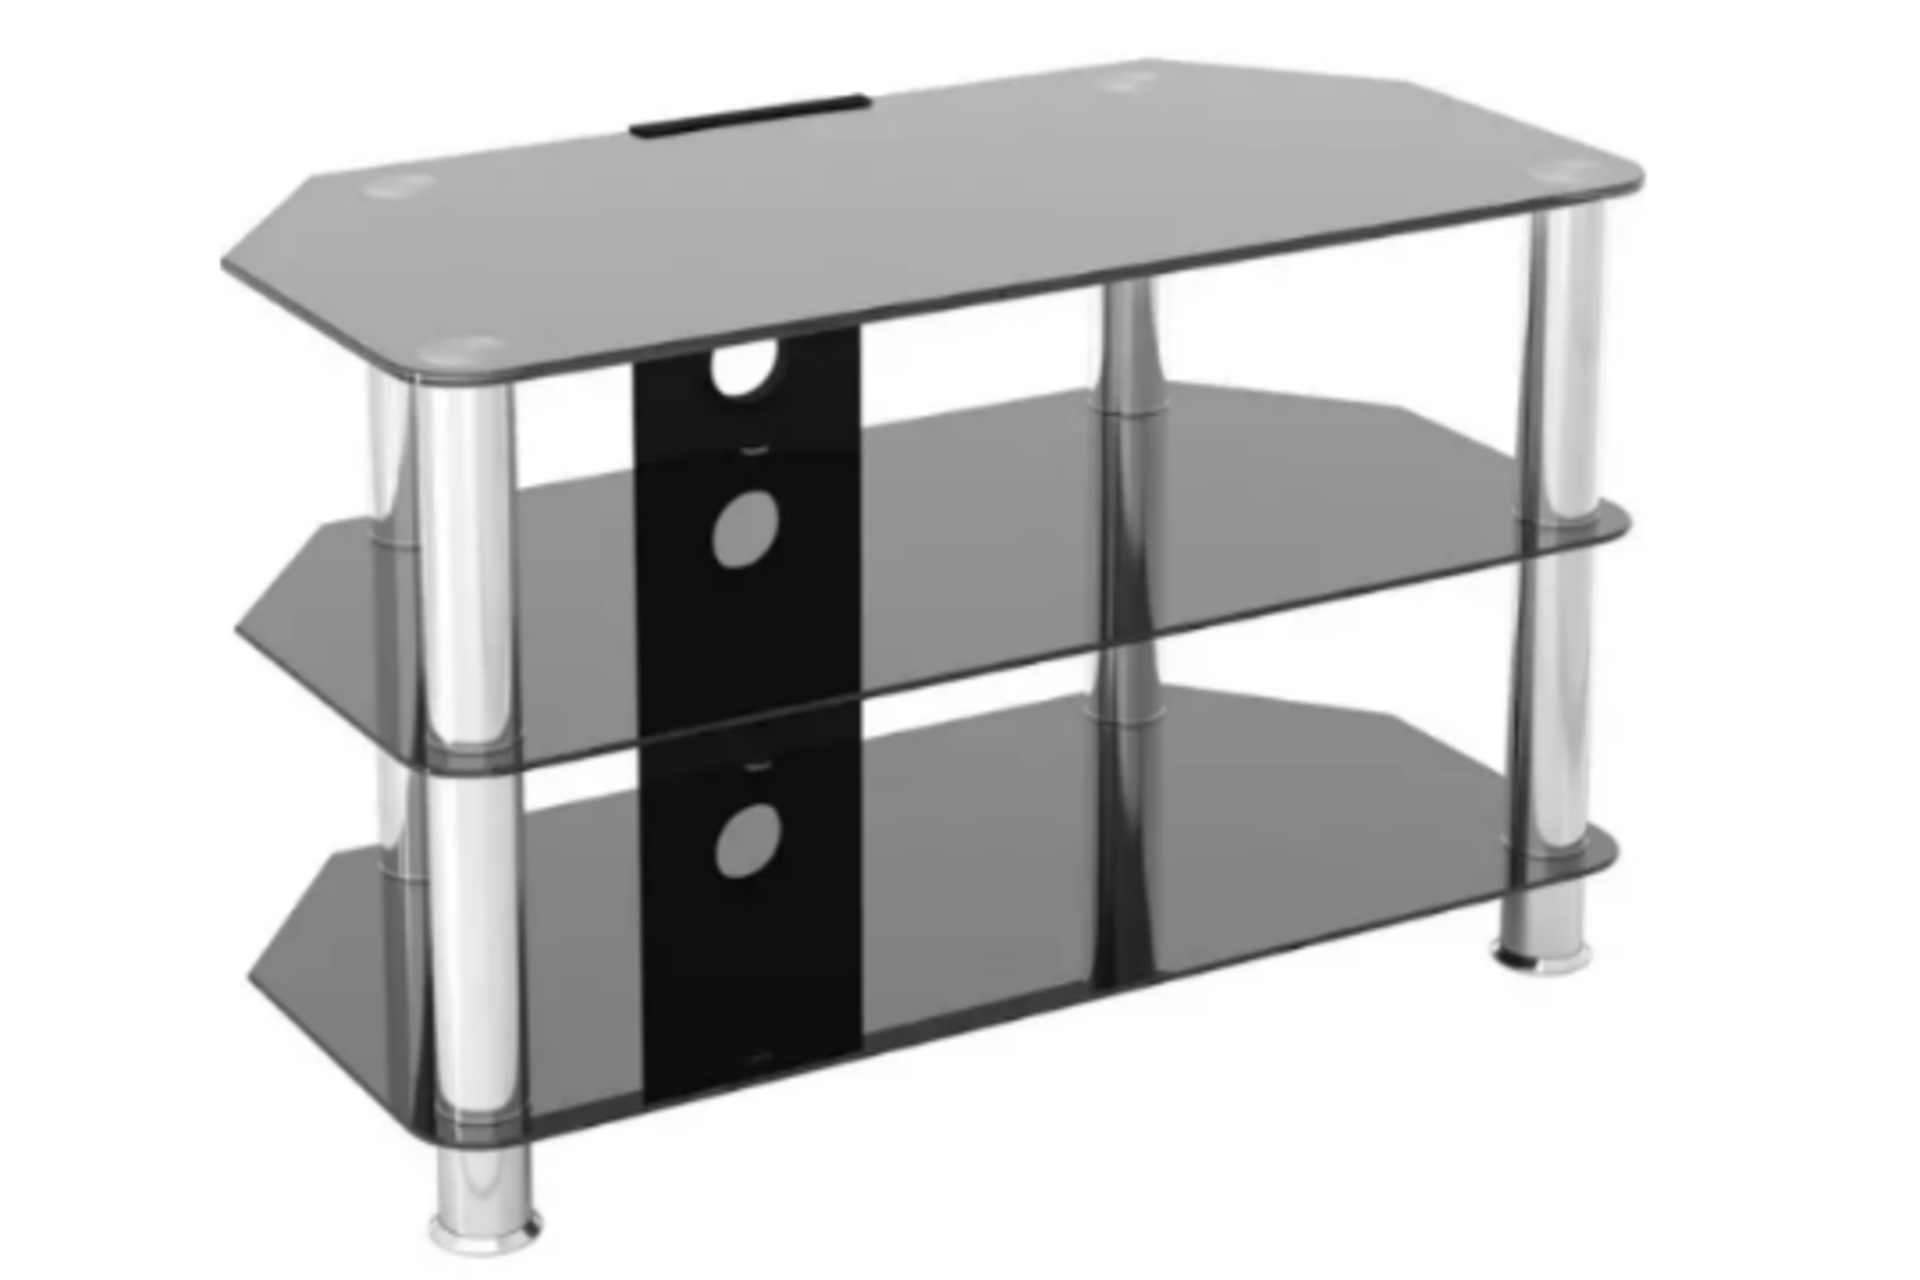 2 x NEW LIVING GLASS TV STANDS. BLACK TEMPERED GLASS WITH STAINLESS STEEL LEGS. EASY TO ASSEMBLE. - Image 3 of 3